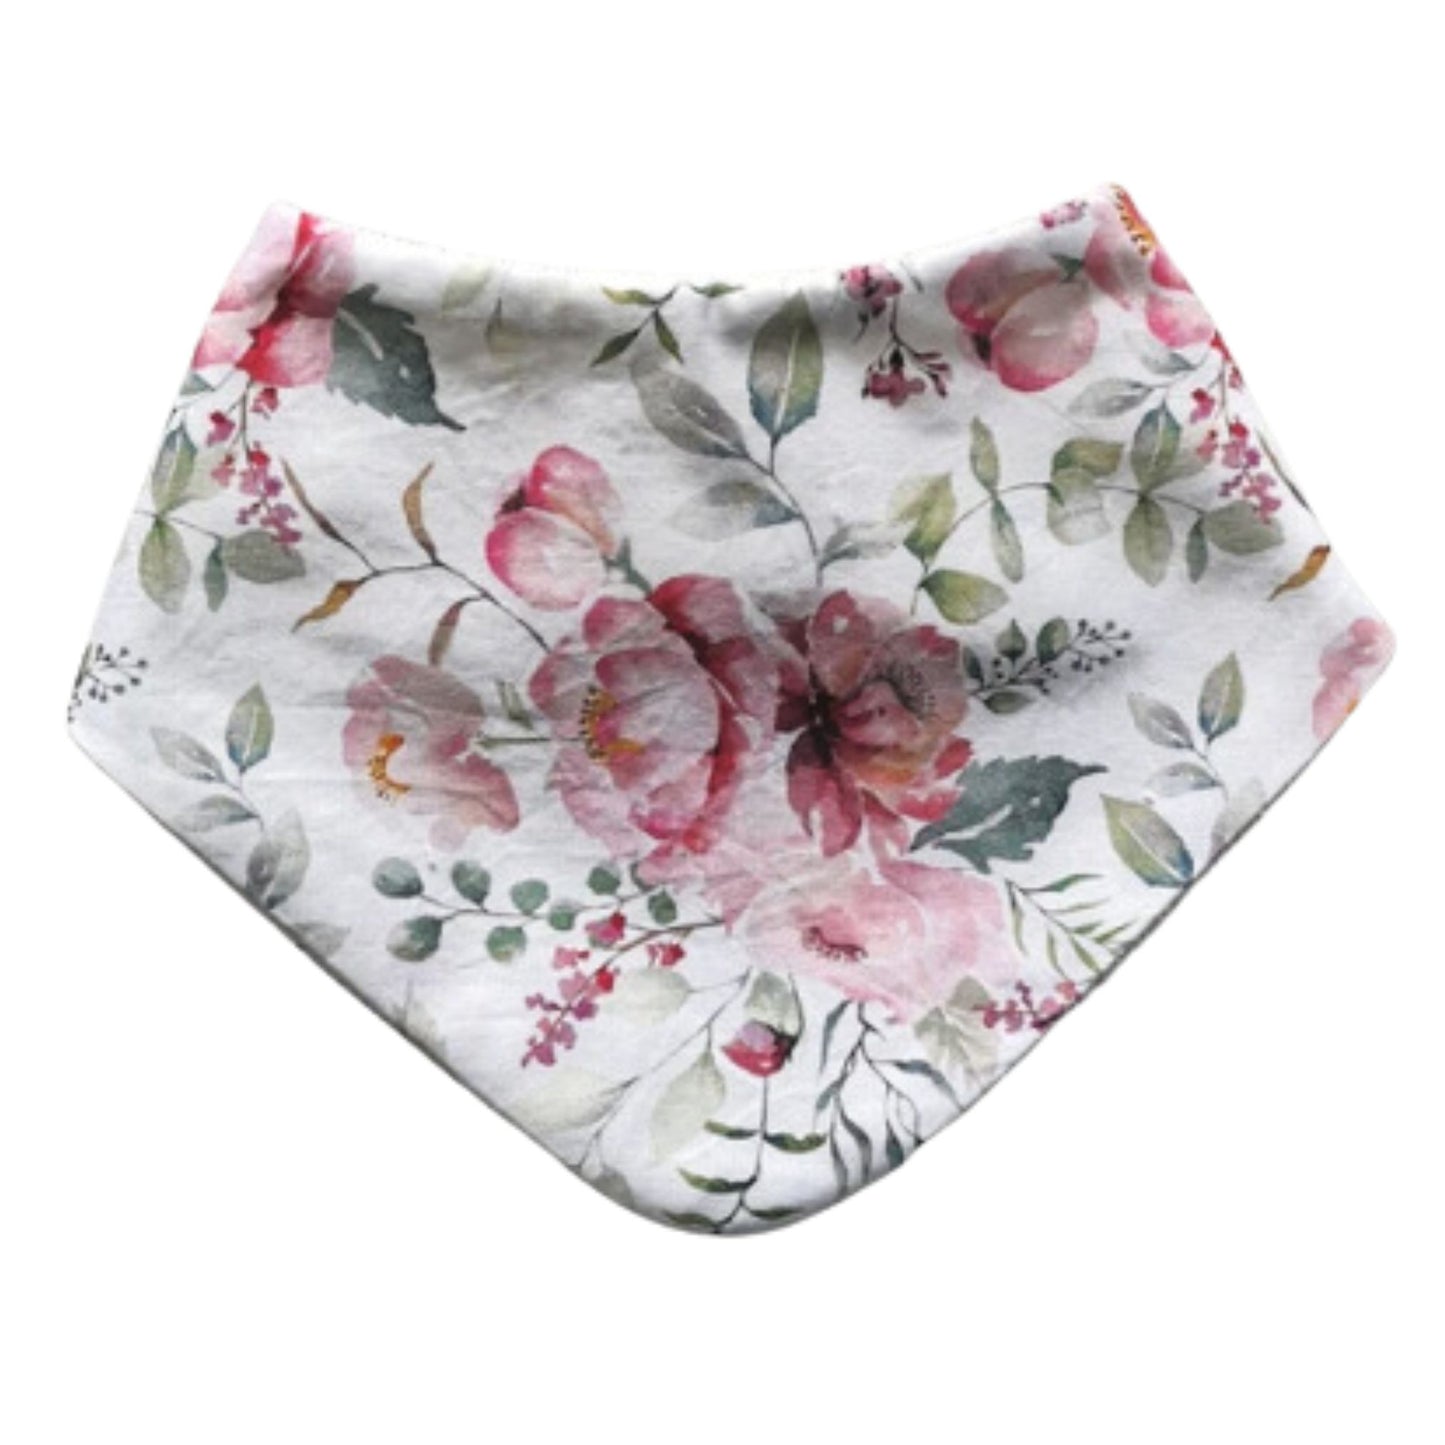 Pretty pink floral design bibs for babies made by Bibbles